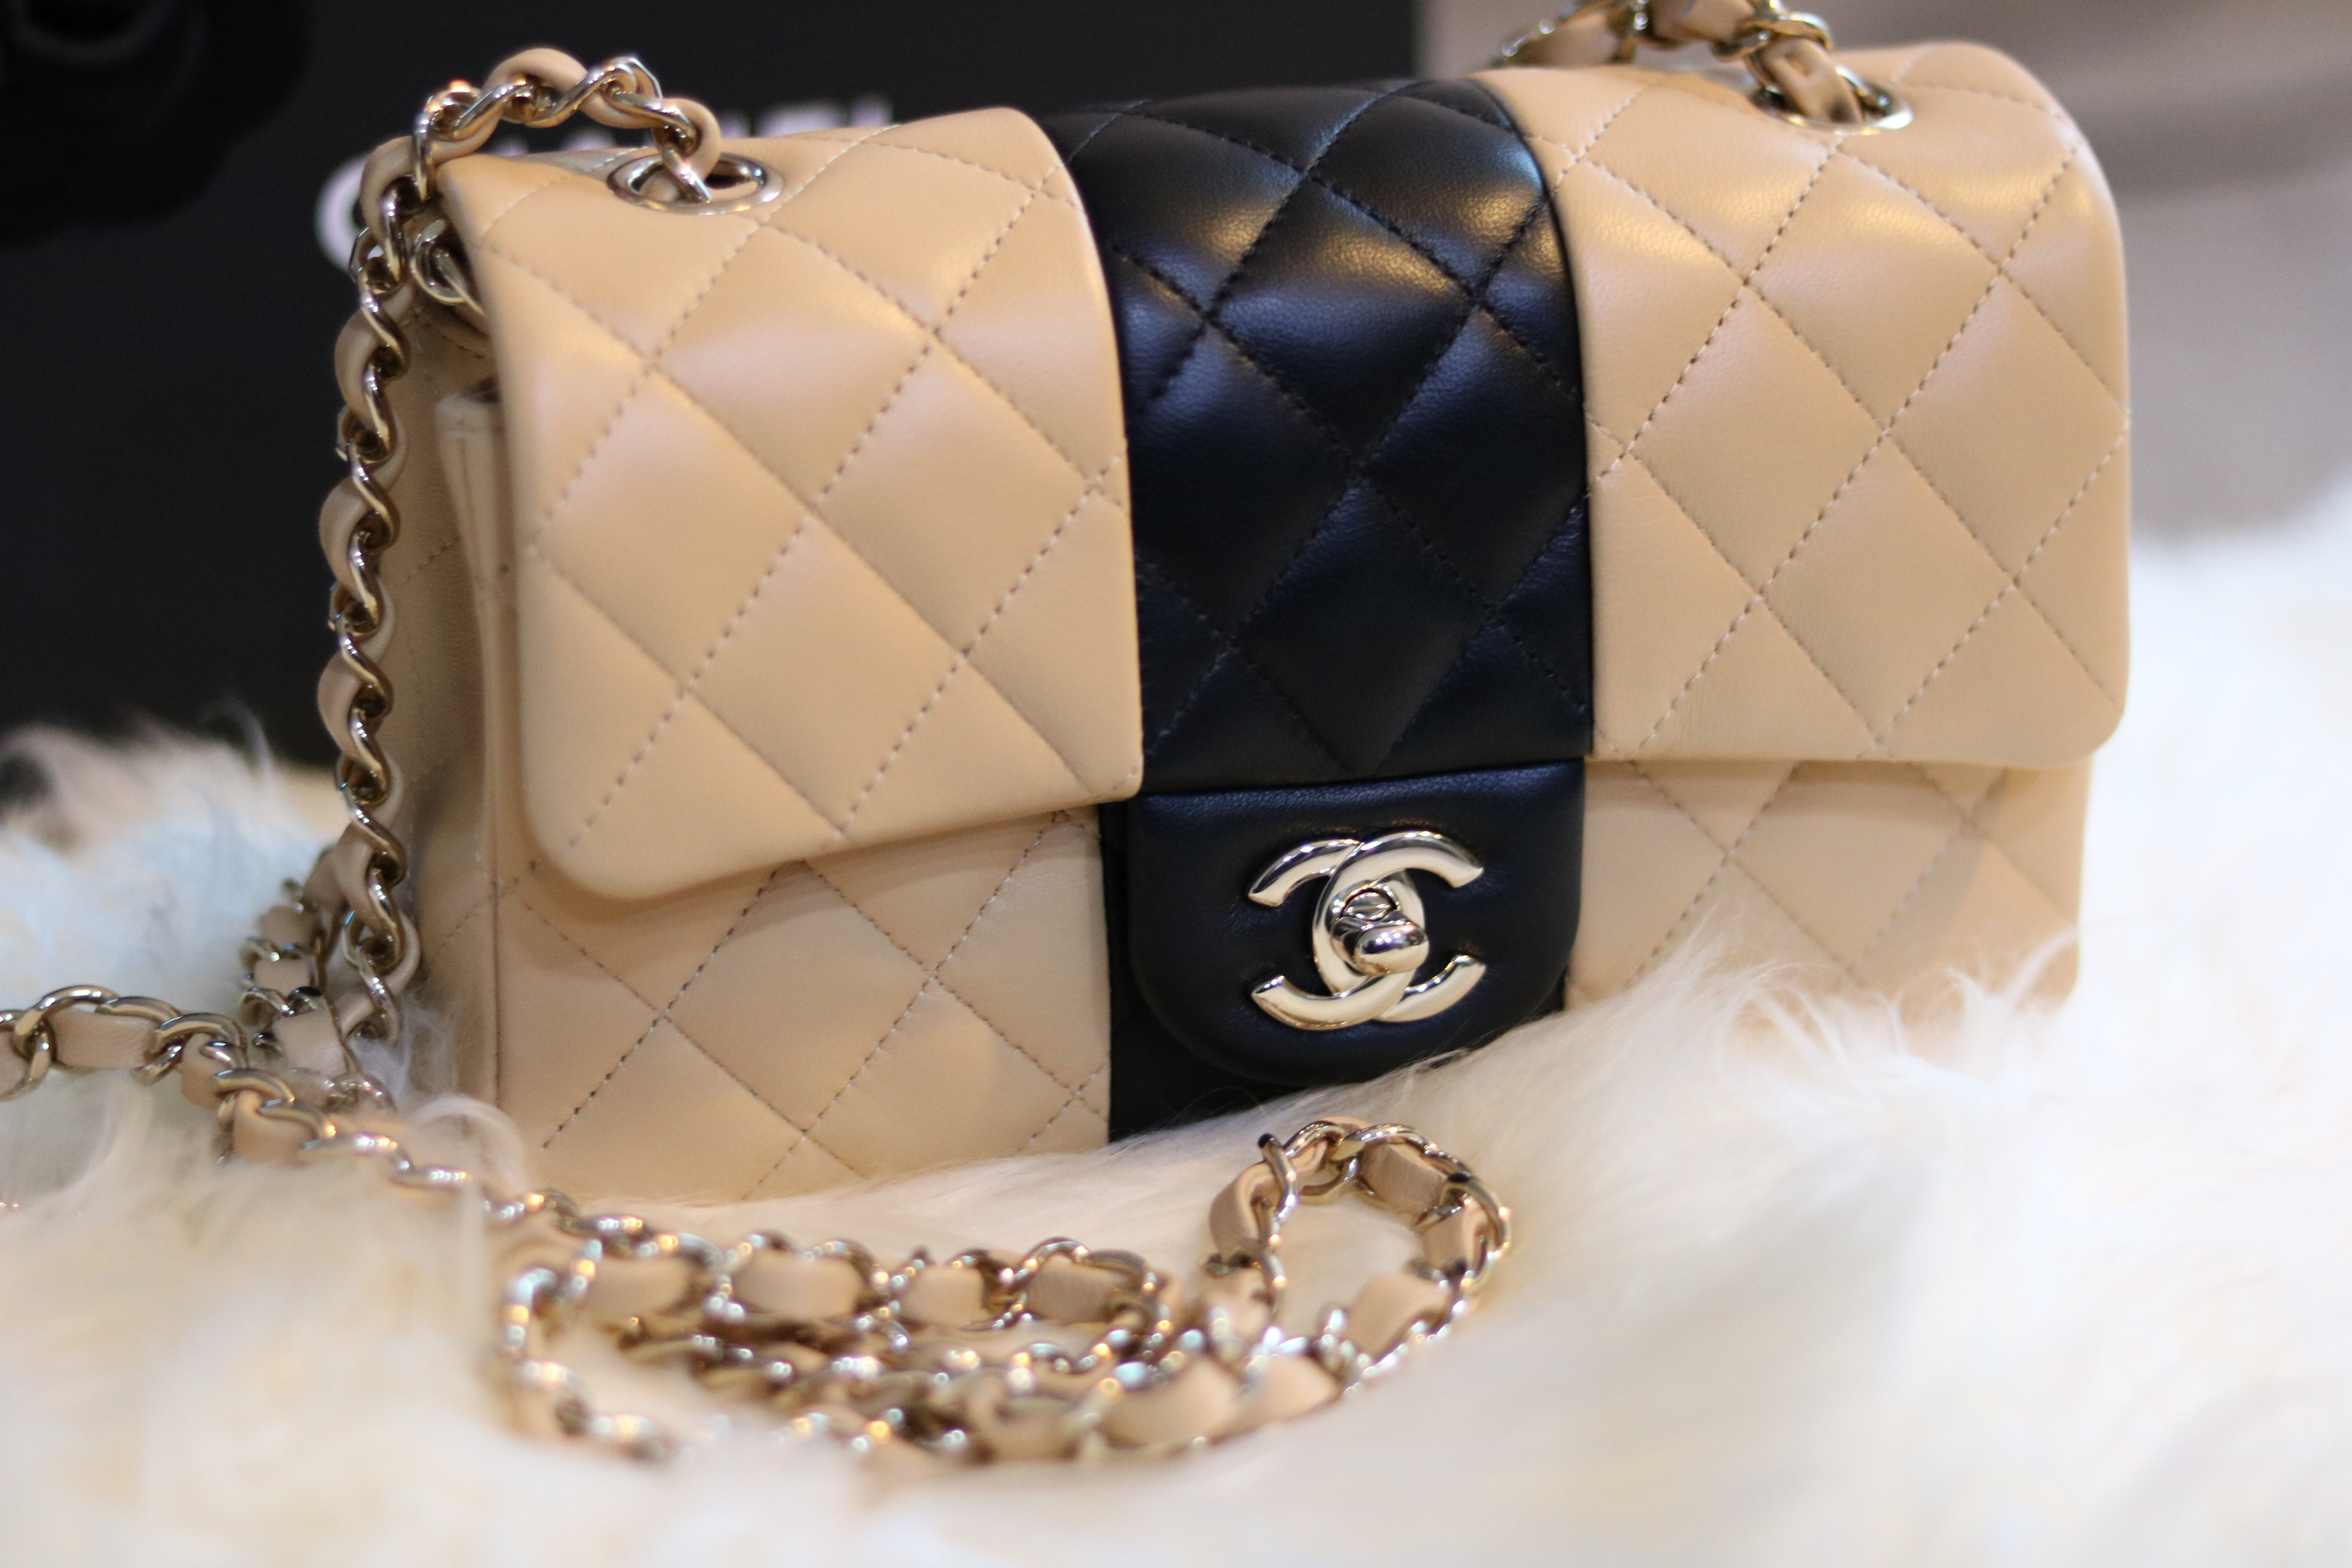 Chanel Bag With Chain - 1,350 For Sale on 1stDibs